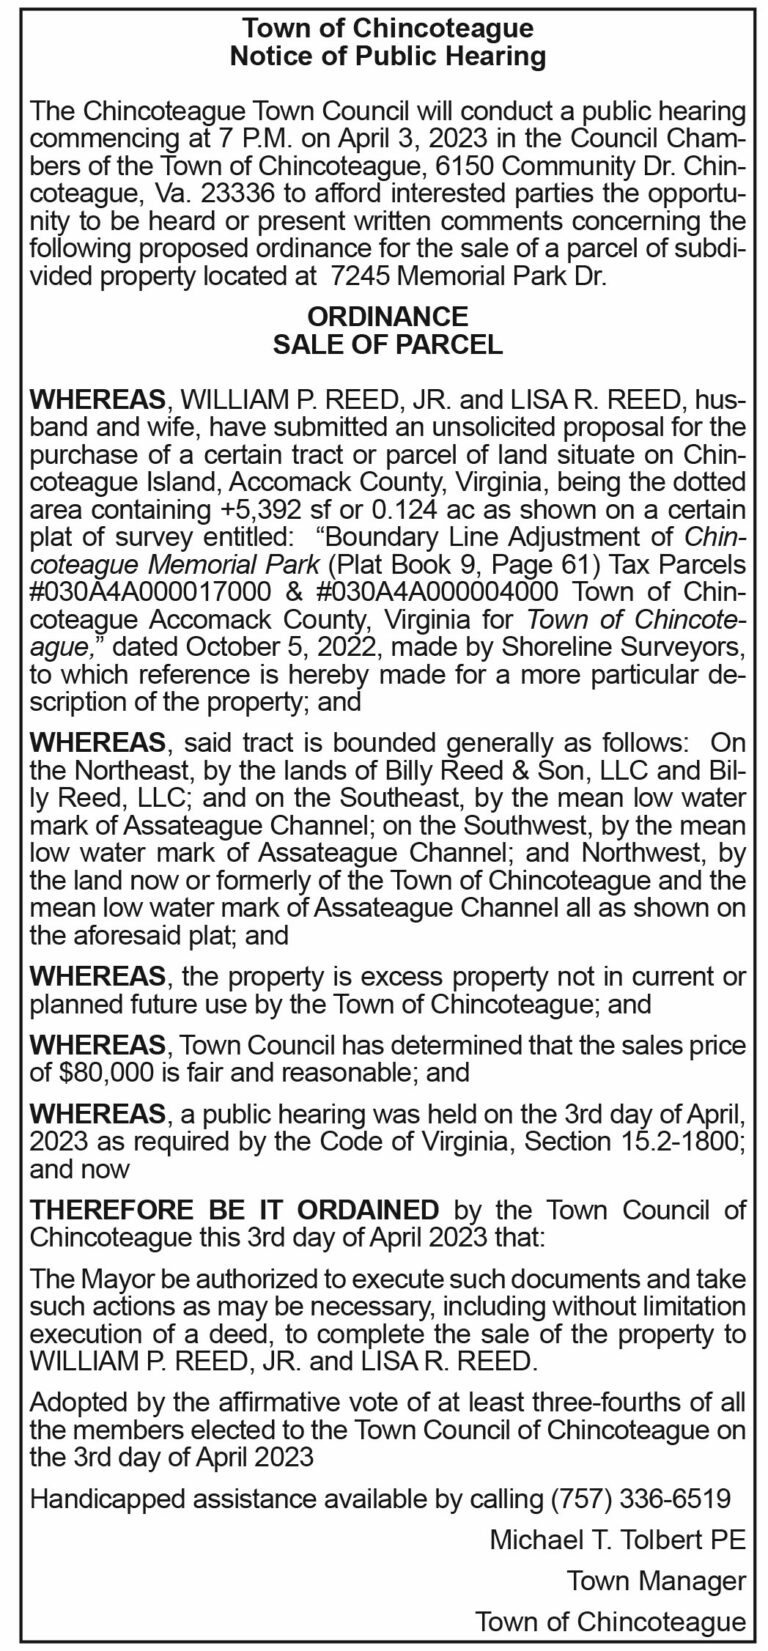 Town of Chincoteague, Notice of Public Hearing, Parcel Sale, 3.24